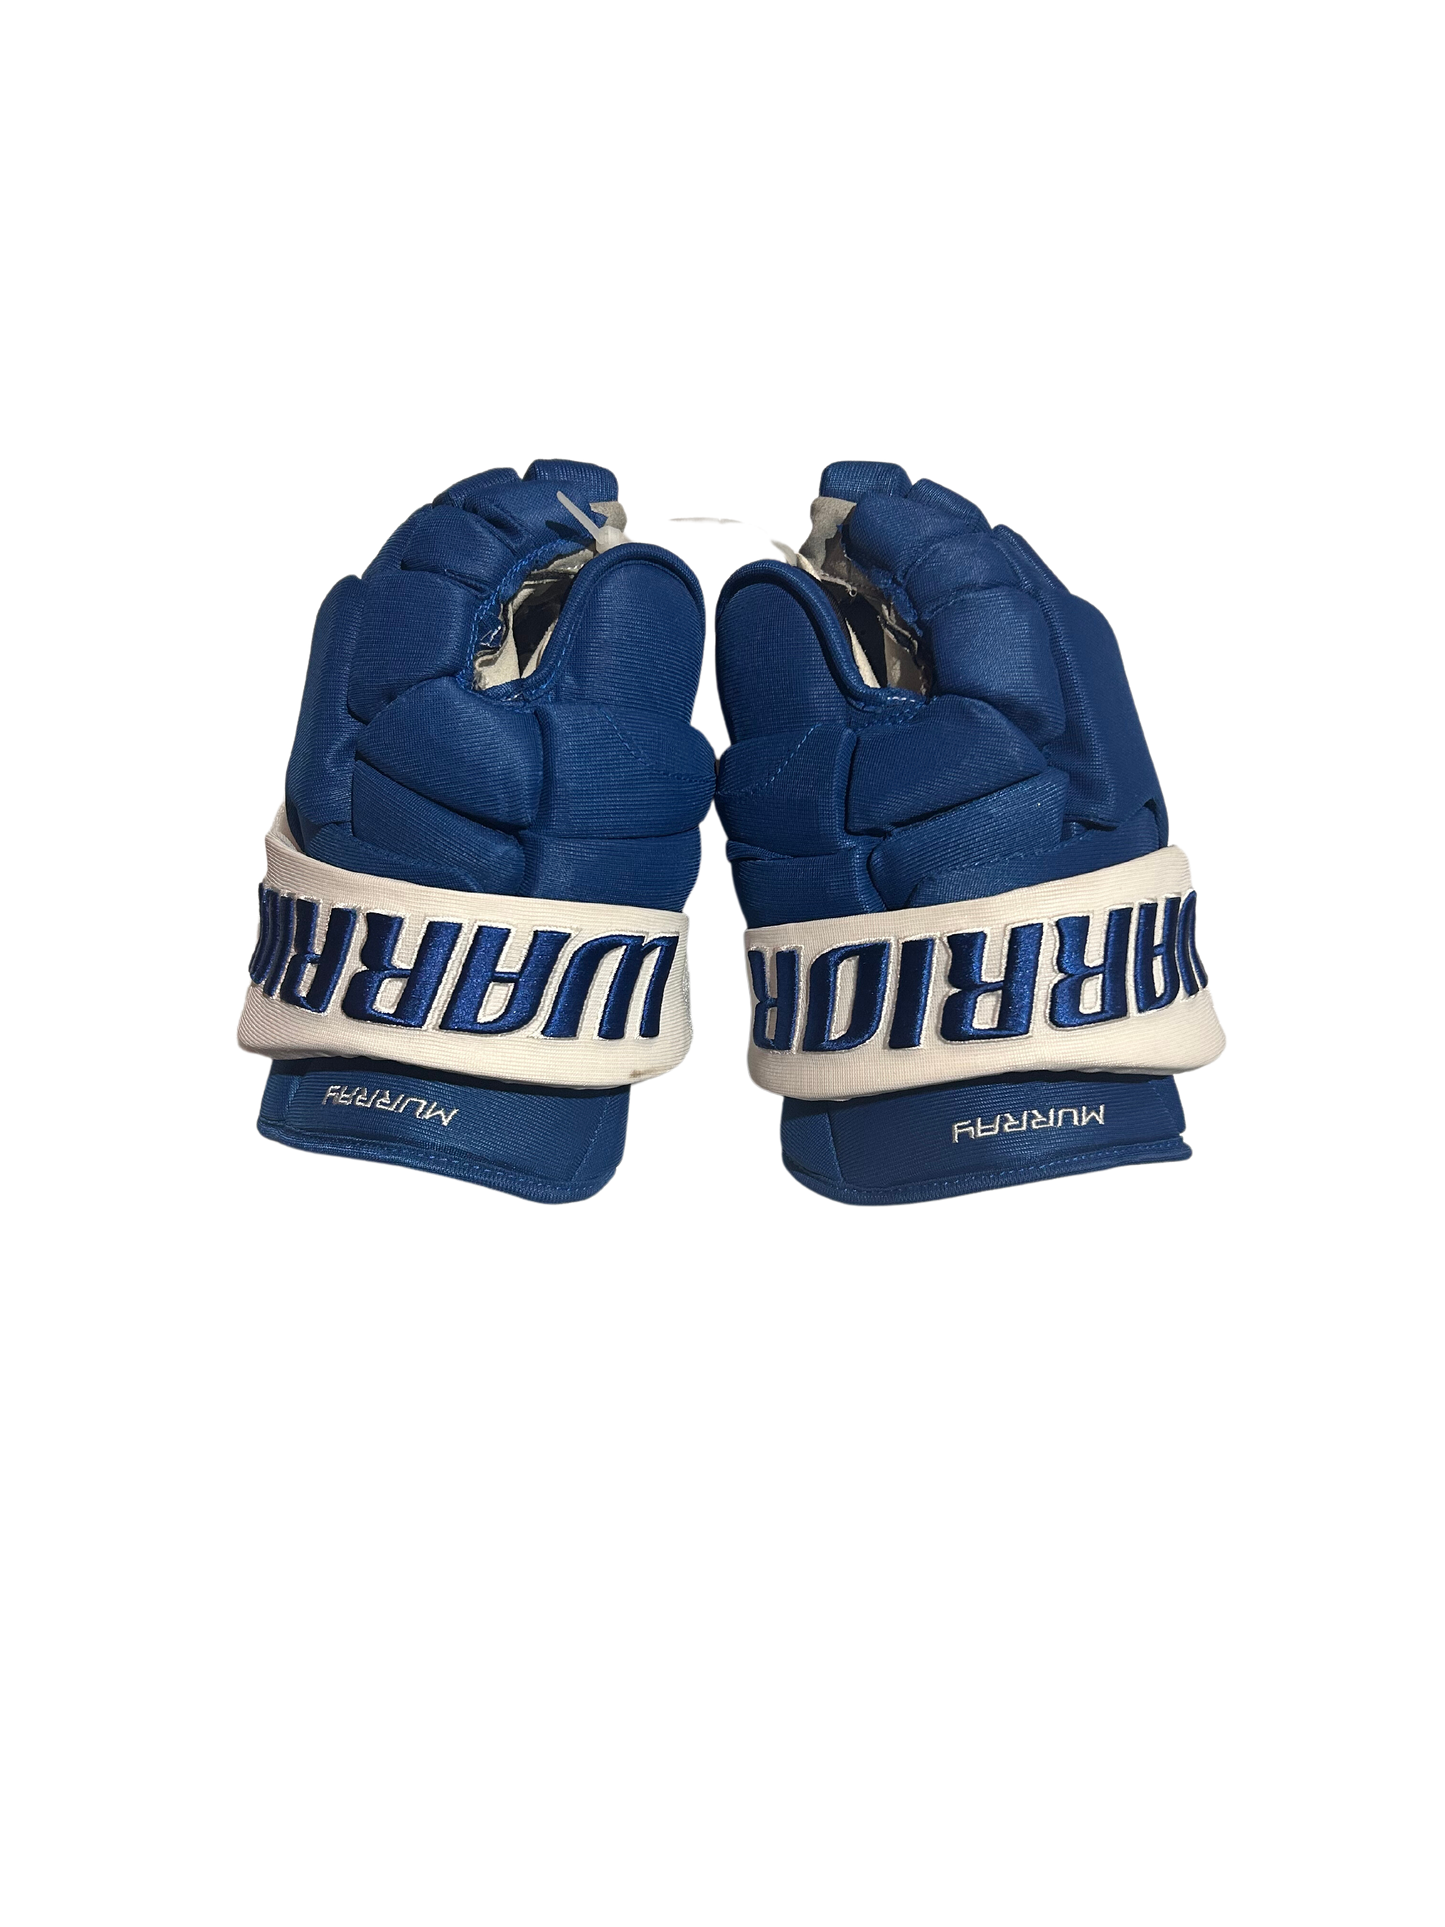 New Player Issued Blue Colorado Avalanche 14" Warrior Covert Gloves (Multiple Players)